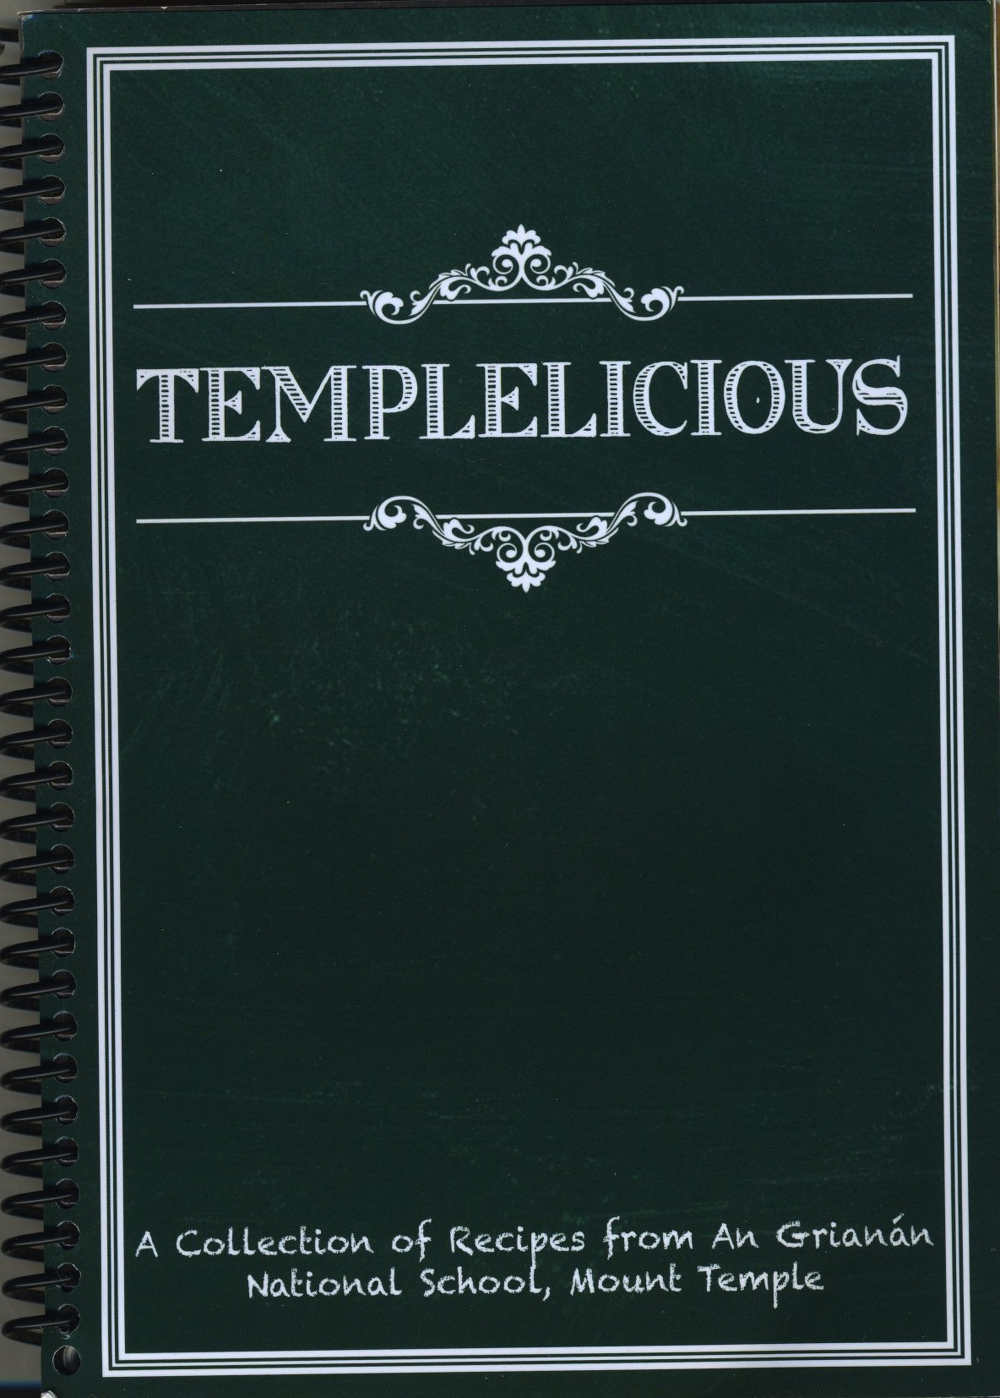 Templelicious